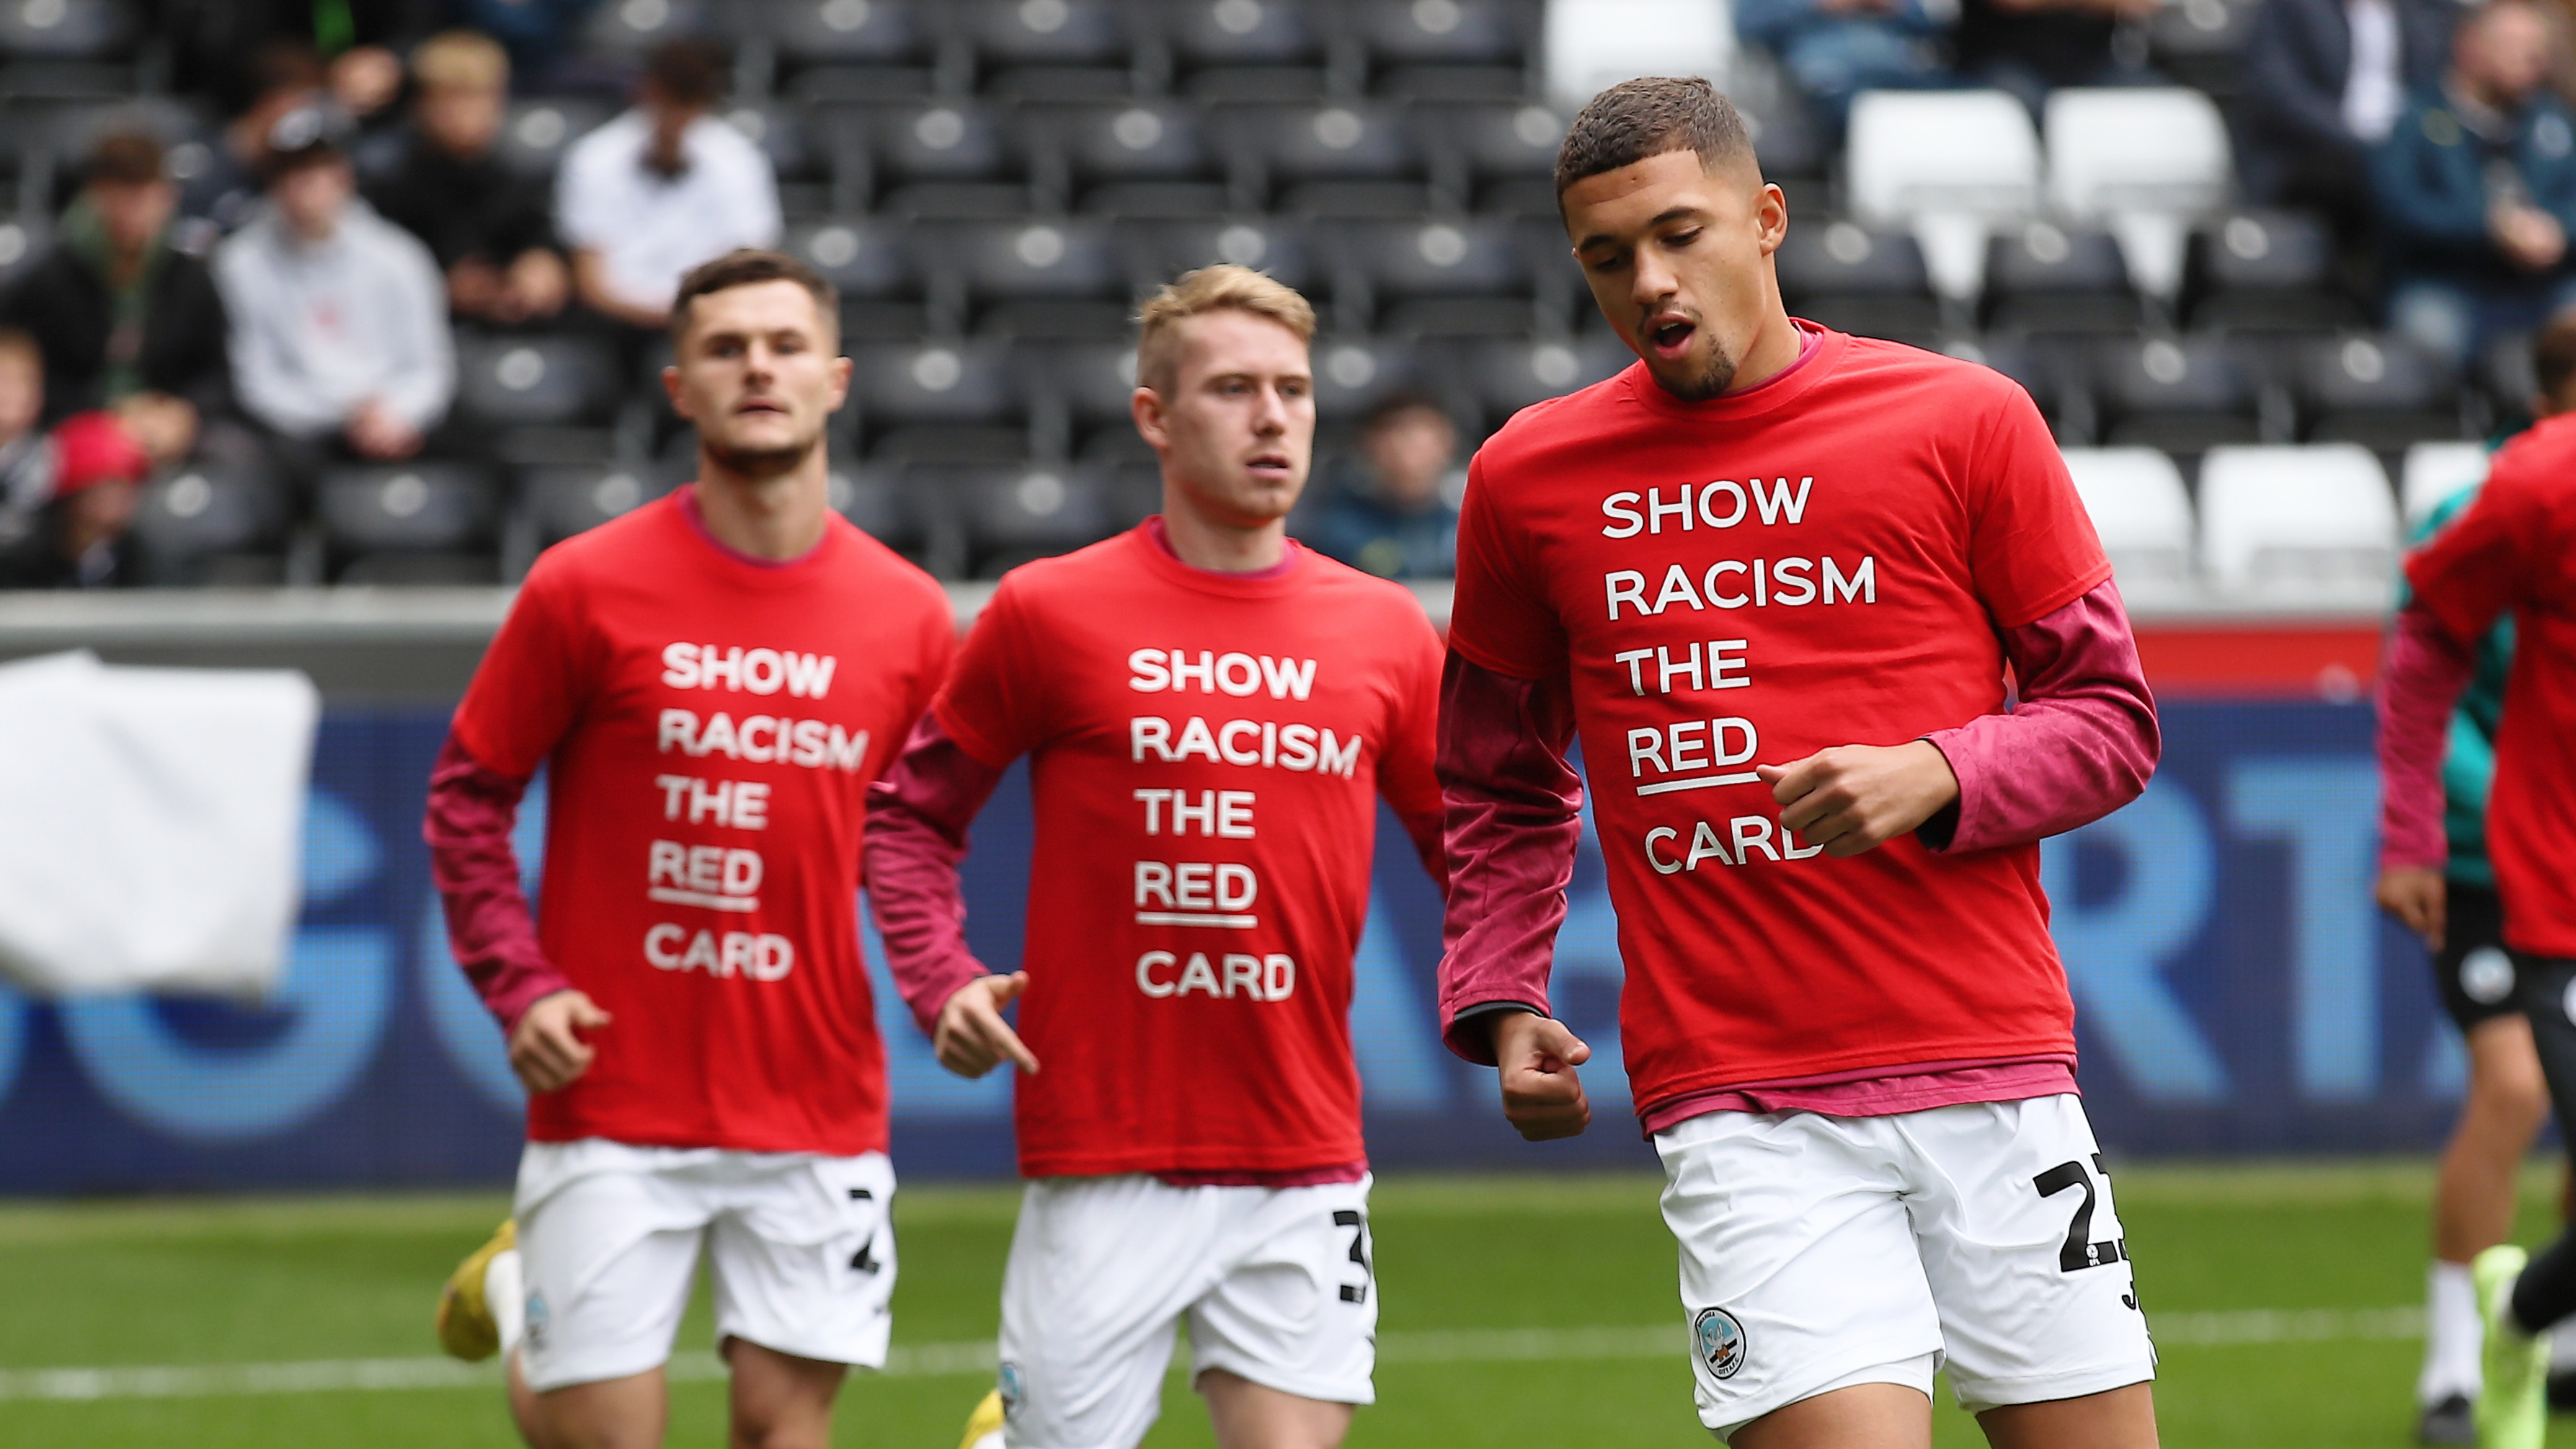 Nathan Wood, Ollie Cooper and Liam Cullen warm up in Show Racism the Red Card shirts